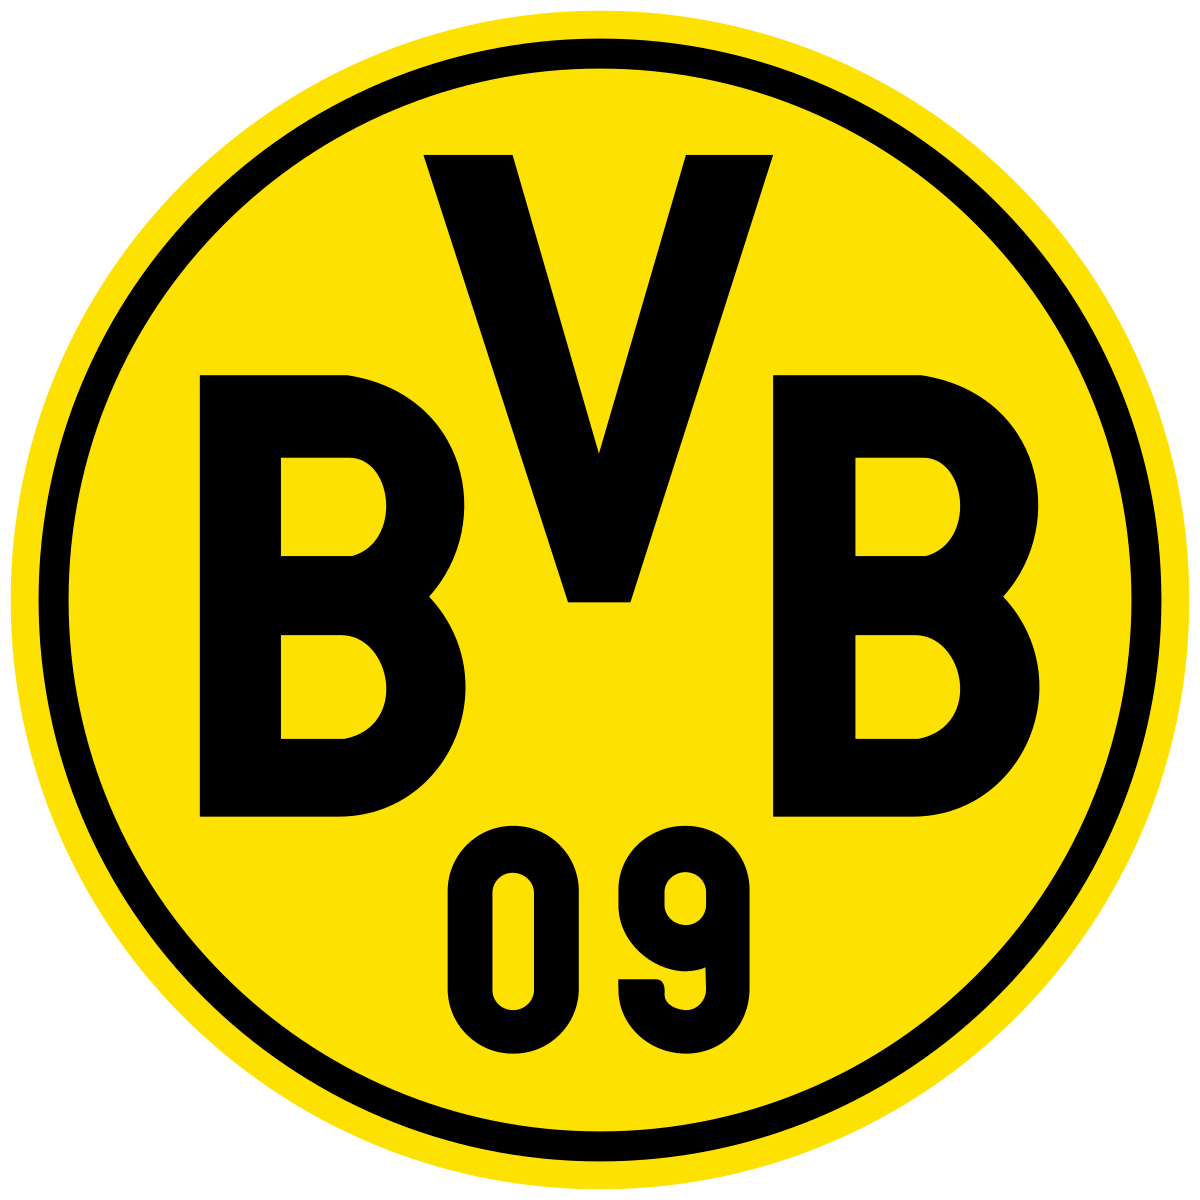 Borussia Dortmund - Liverpool FCJurgen Klopp one manager to manage the two clubs, taken both club to a champions league final.Both teams are known for boisterous atmosphere. They also share a pre-match 'You'll Never Walk Alone' rendition.